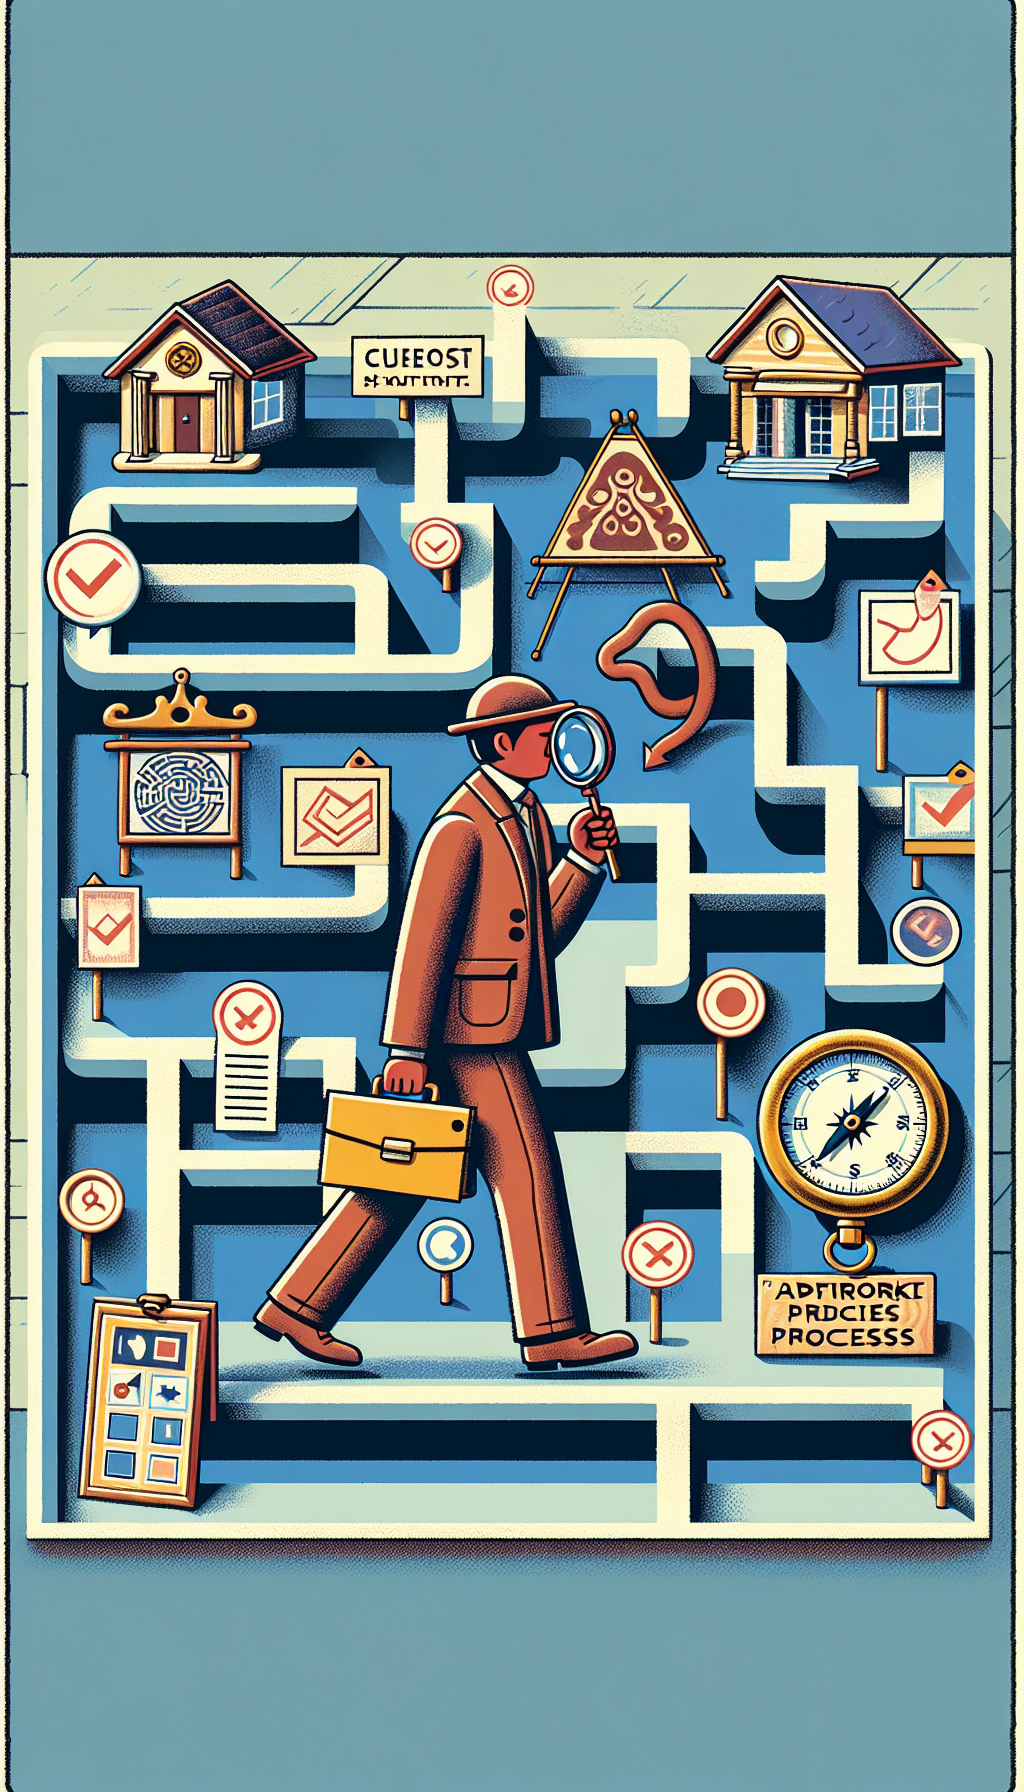 An illustration depicts a person in the guise of an explorer, armed with a magnifying glass and a checklist, navigating a labyrinth shaped like a home. Each turn reveals icons of art pieces with price tags and checkpoints labeled with appraisal steps, while a compass in the corner signifies 'Artwork Value' to guide the journey.